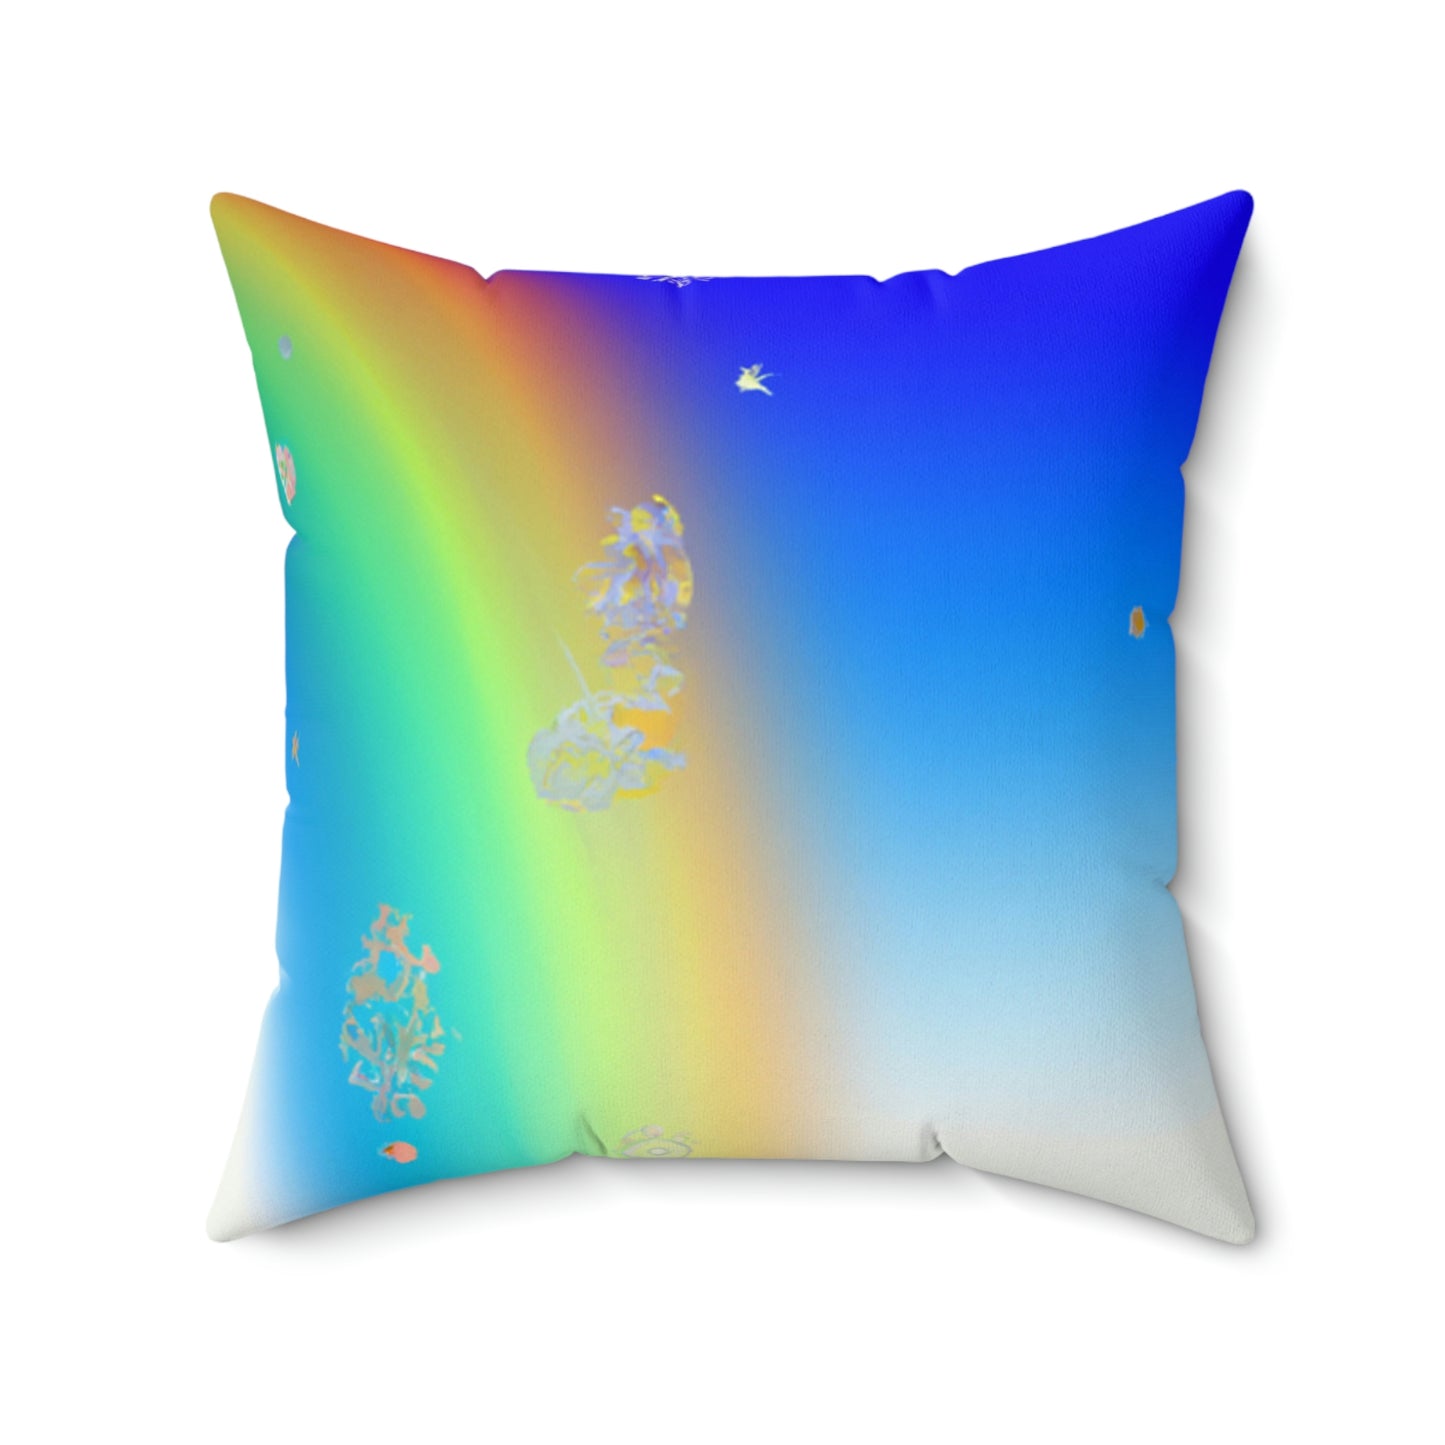 "A Cold Solace" - The Alien Square Pillow